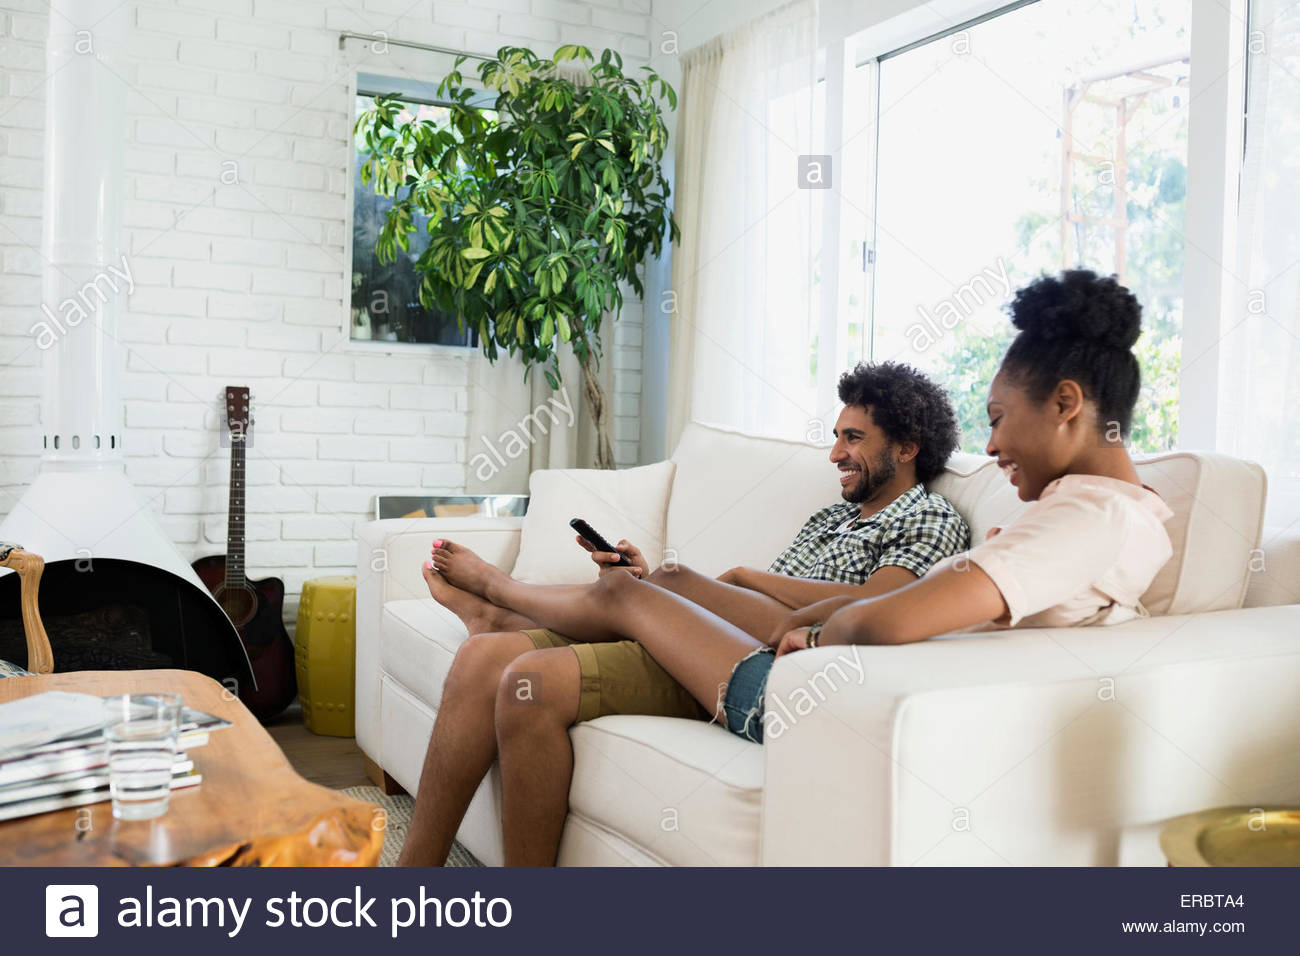 Casual couple relaxing watching TV in living room Stock Photo